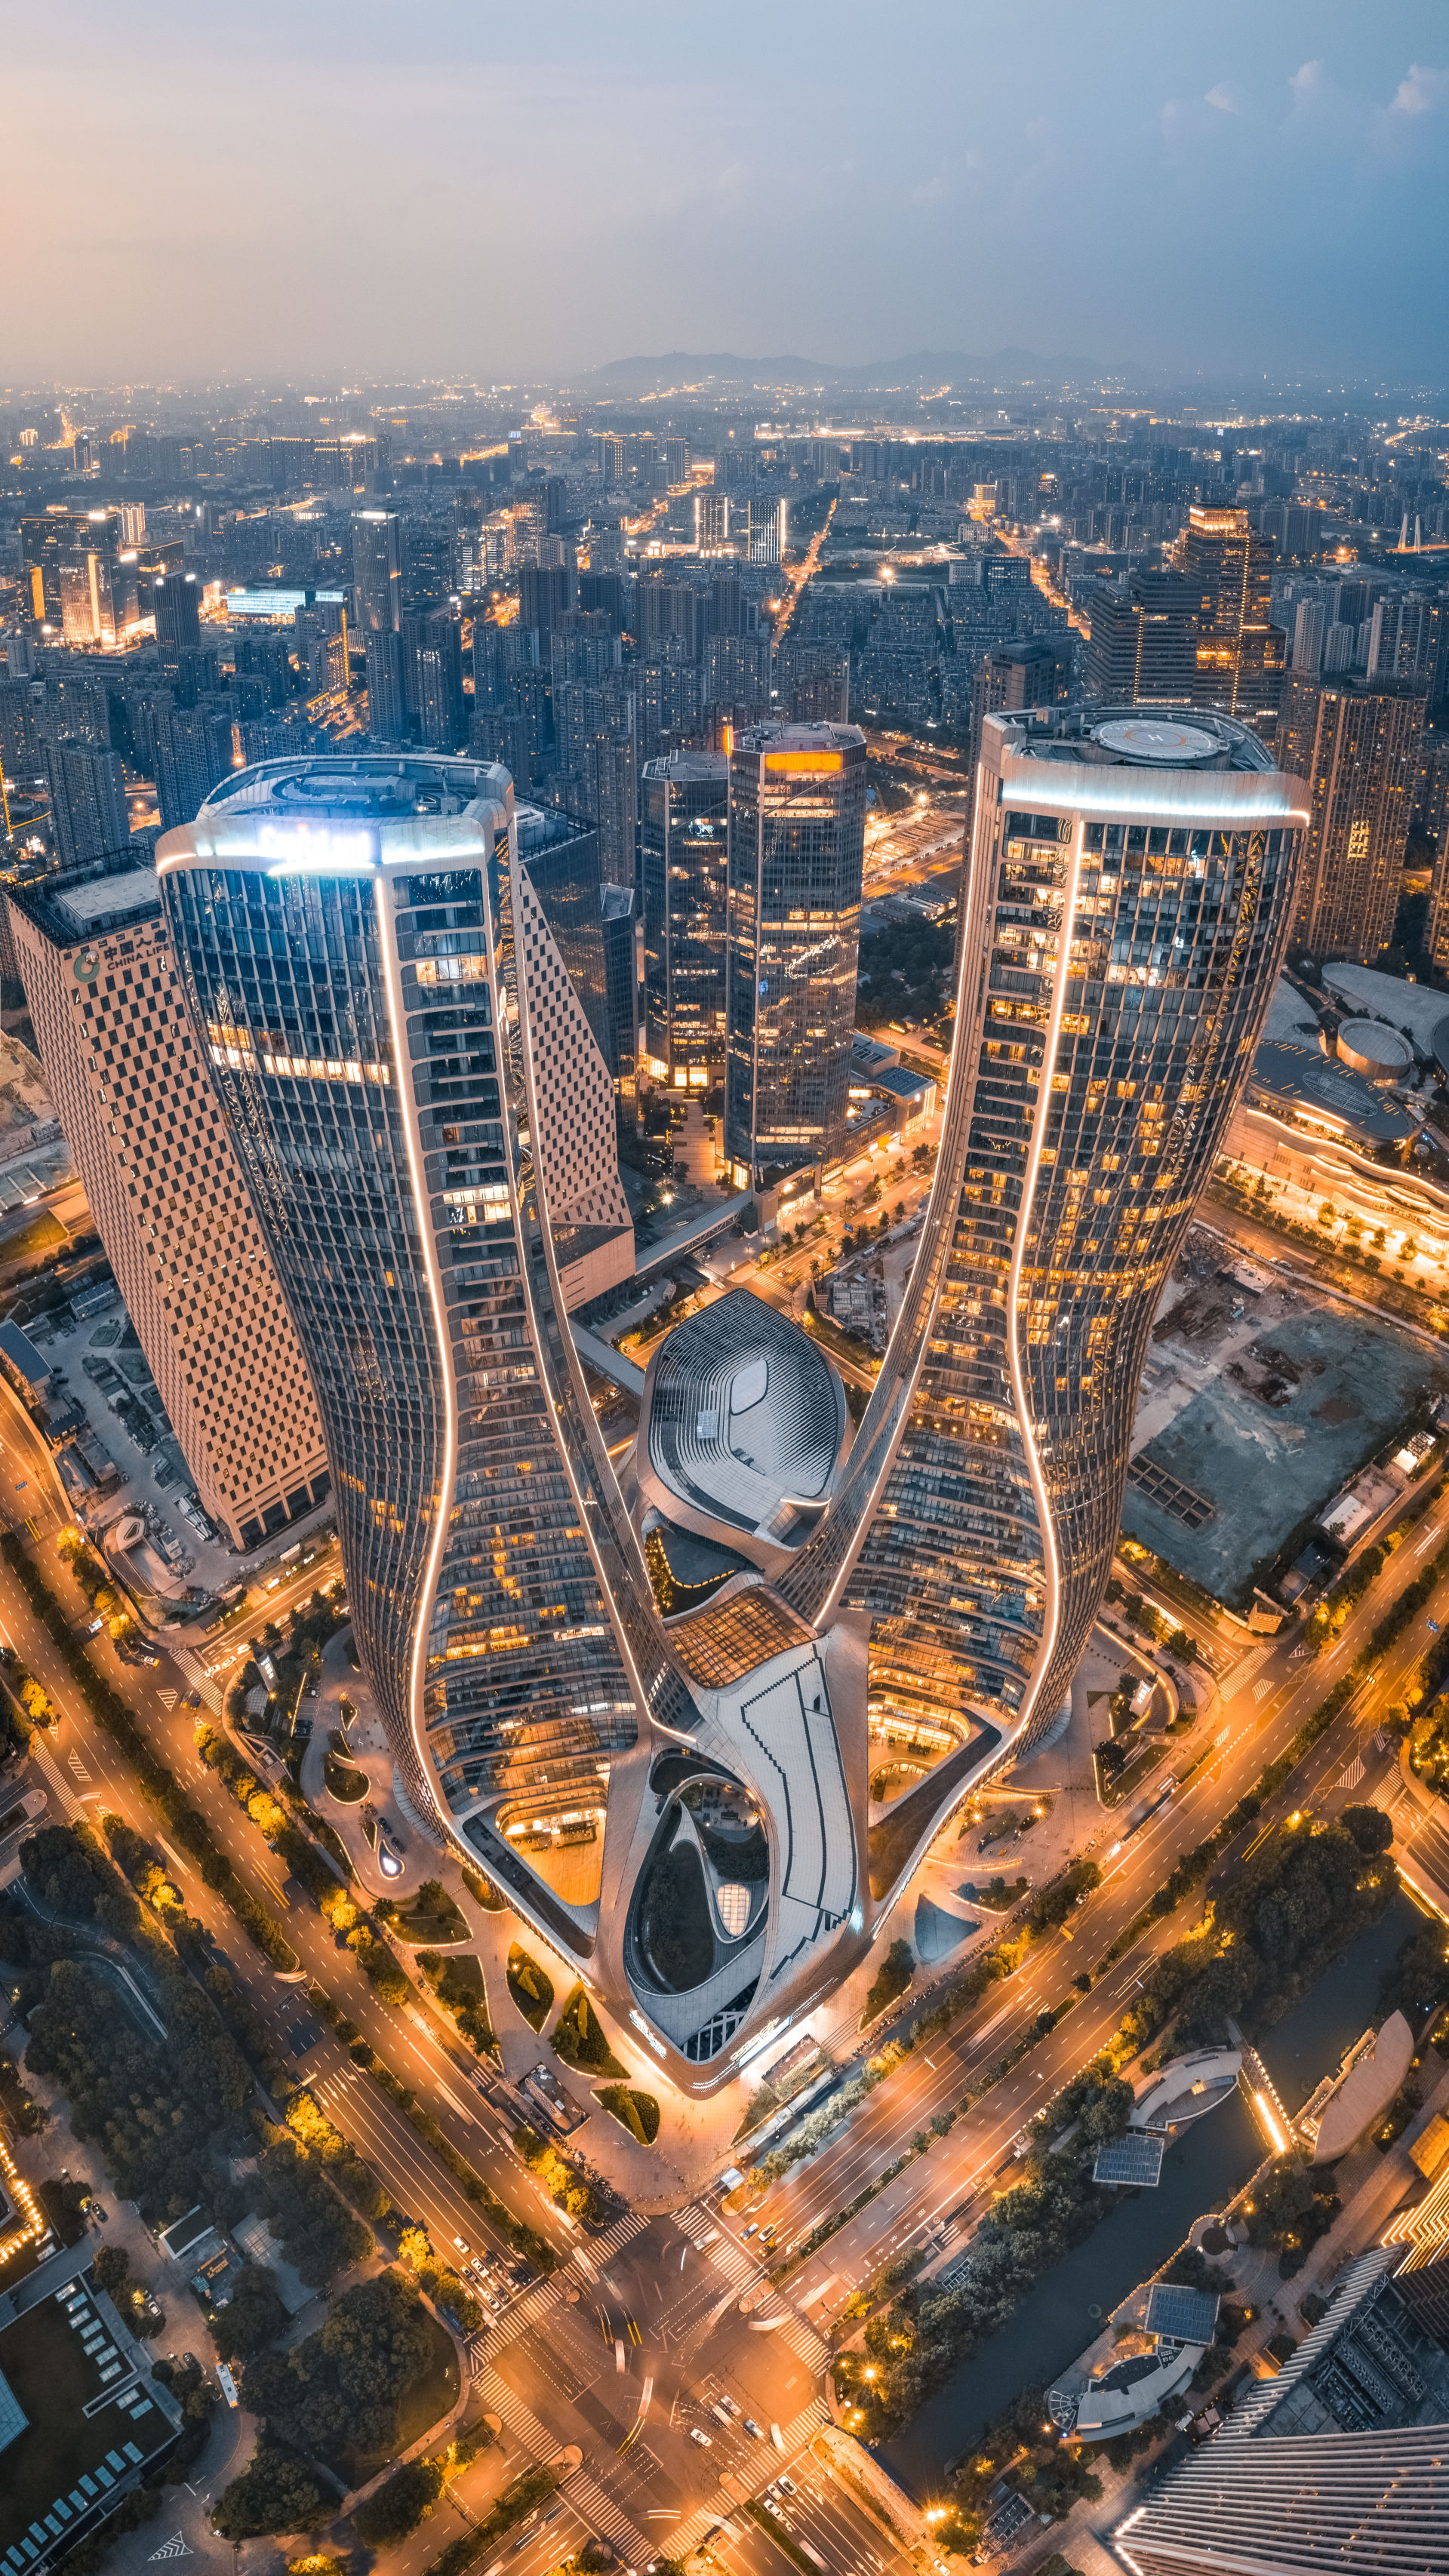 architecture, cities, city, building, view from above, skyscrapers